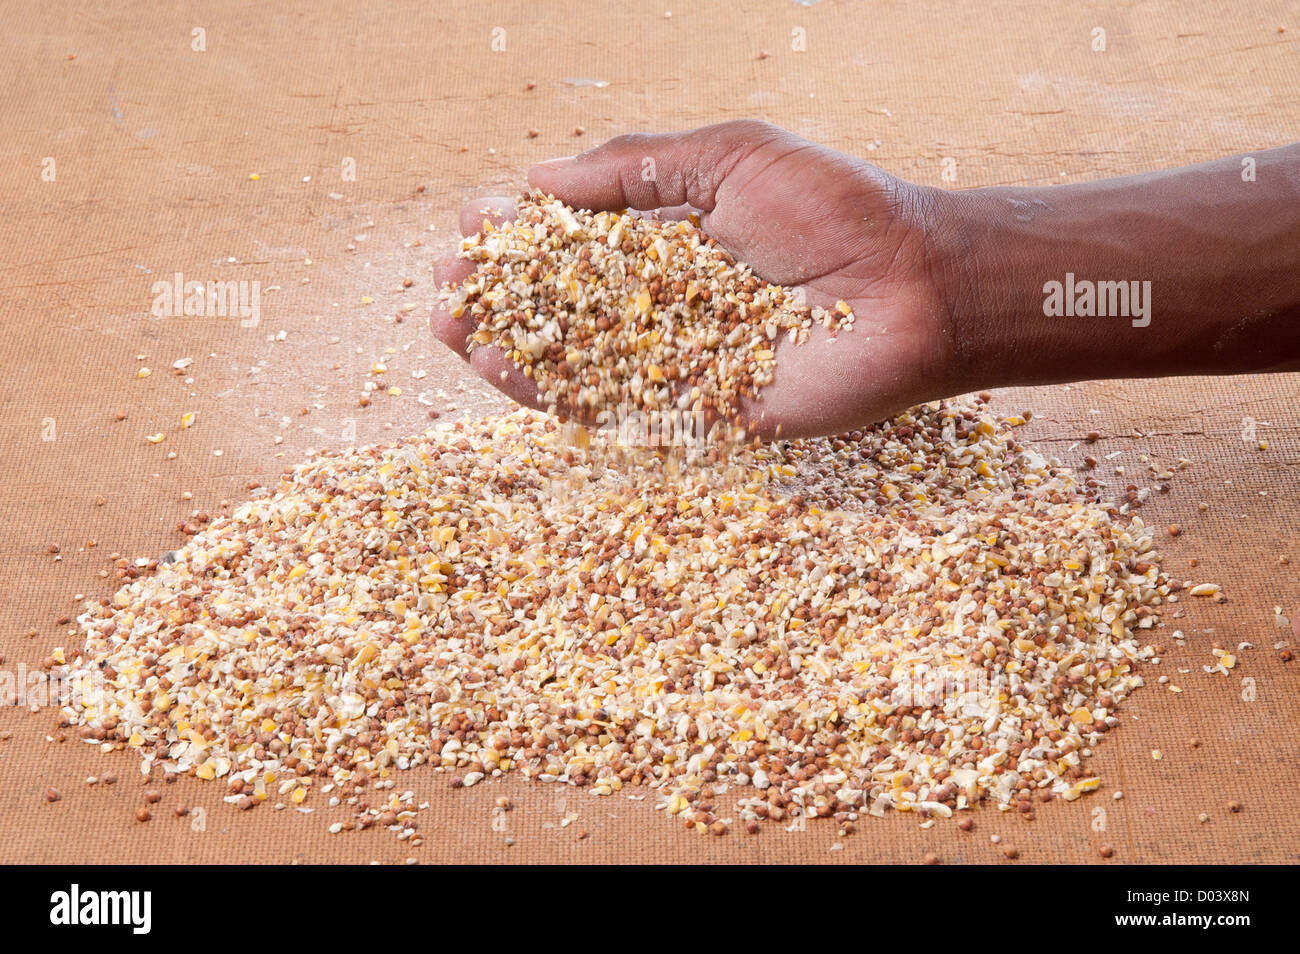 African's hand pouring grain used for poultry feed Stock Photo